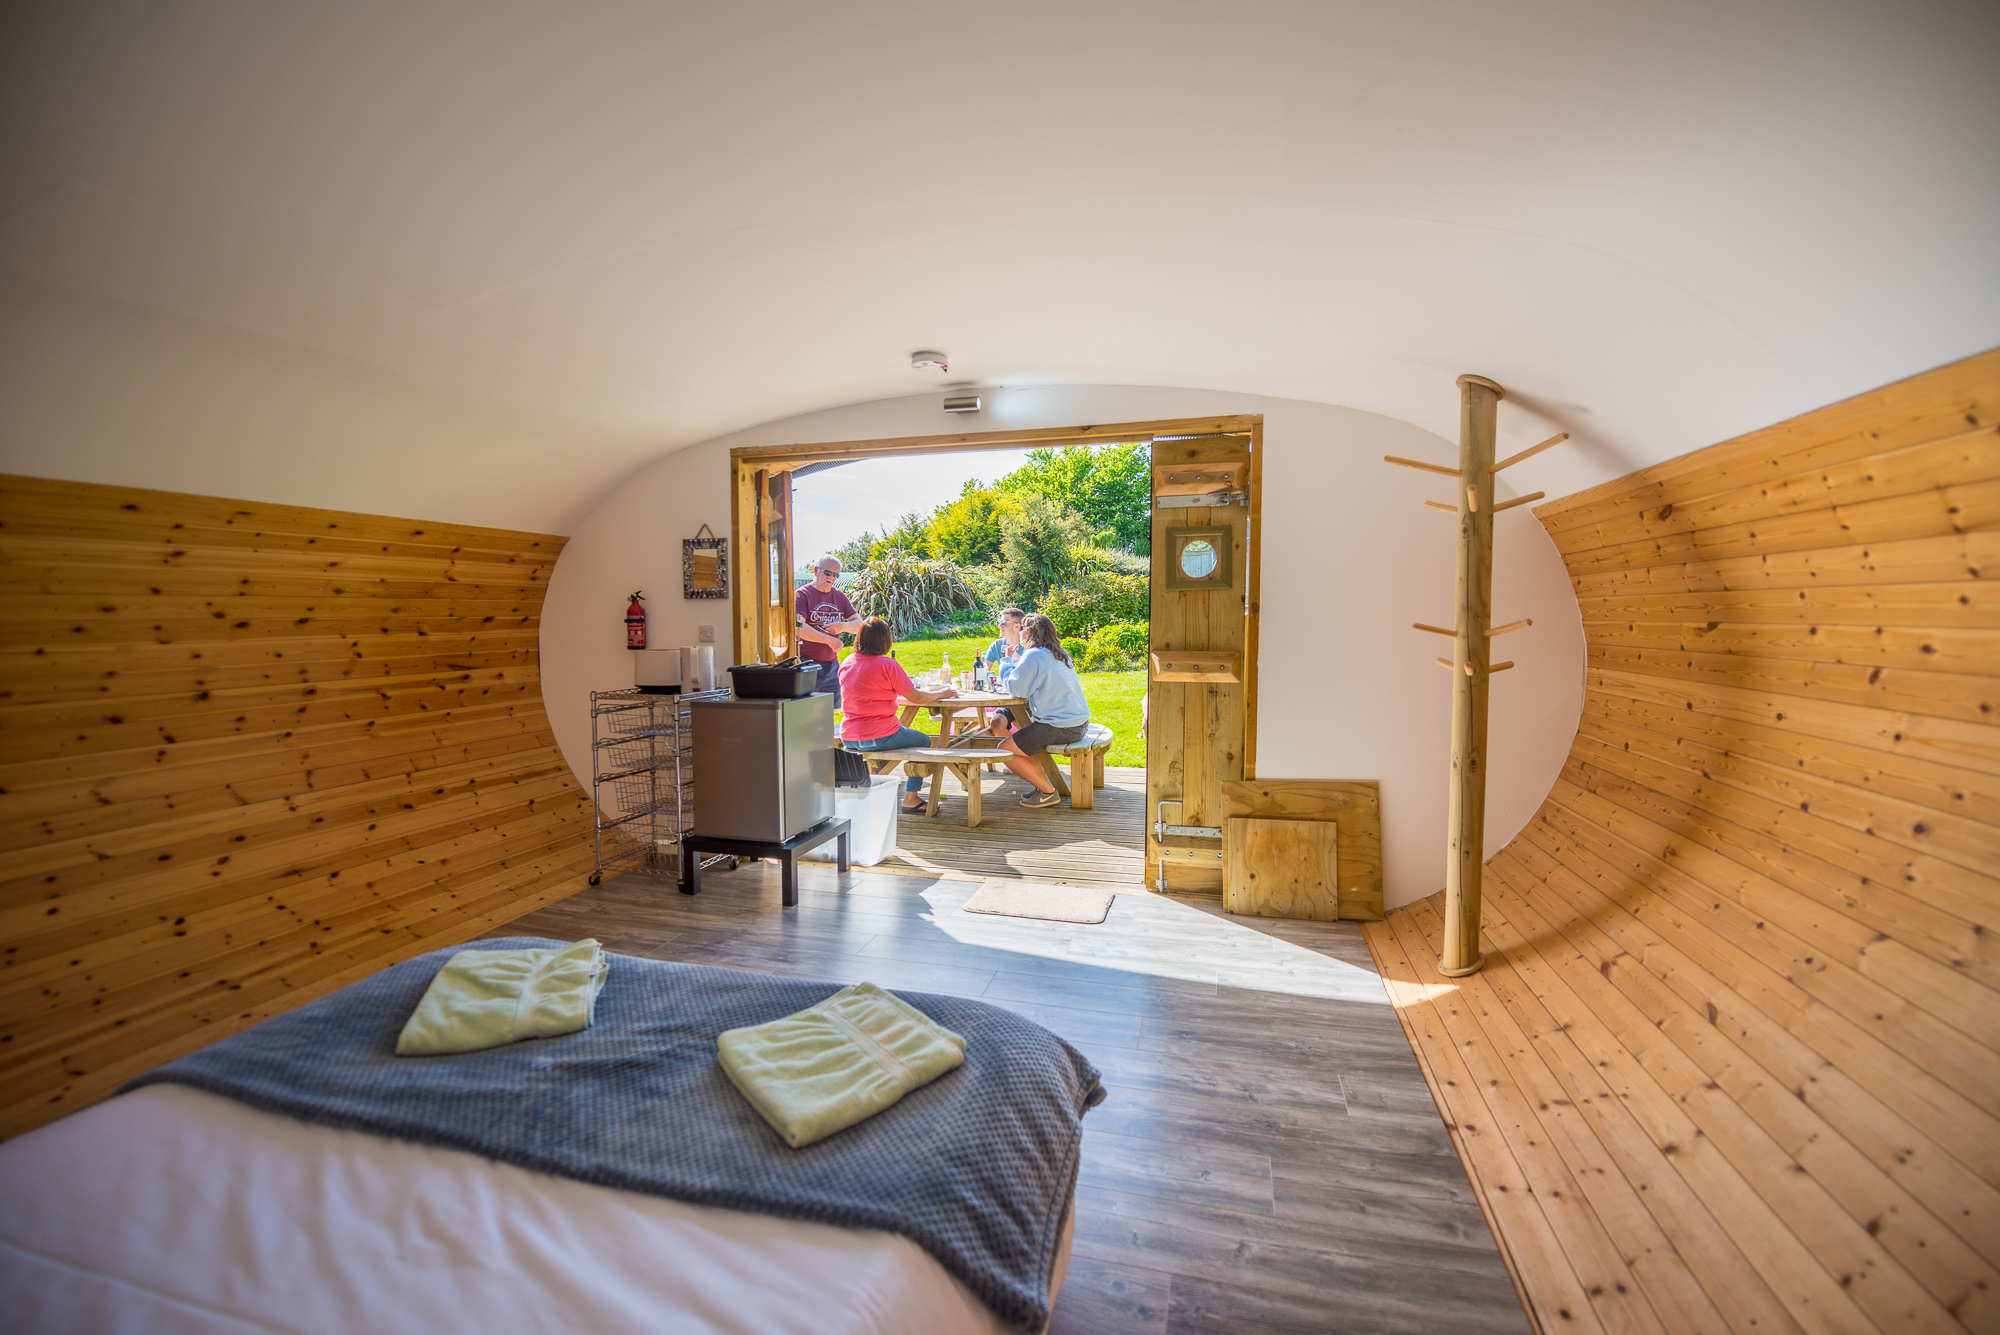 Glamping in a Surf Pod at Bude in Cornwall